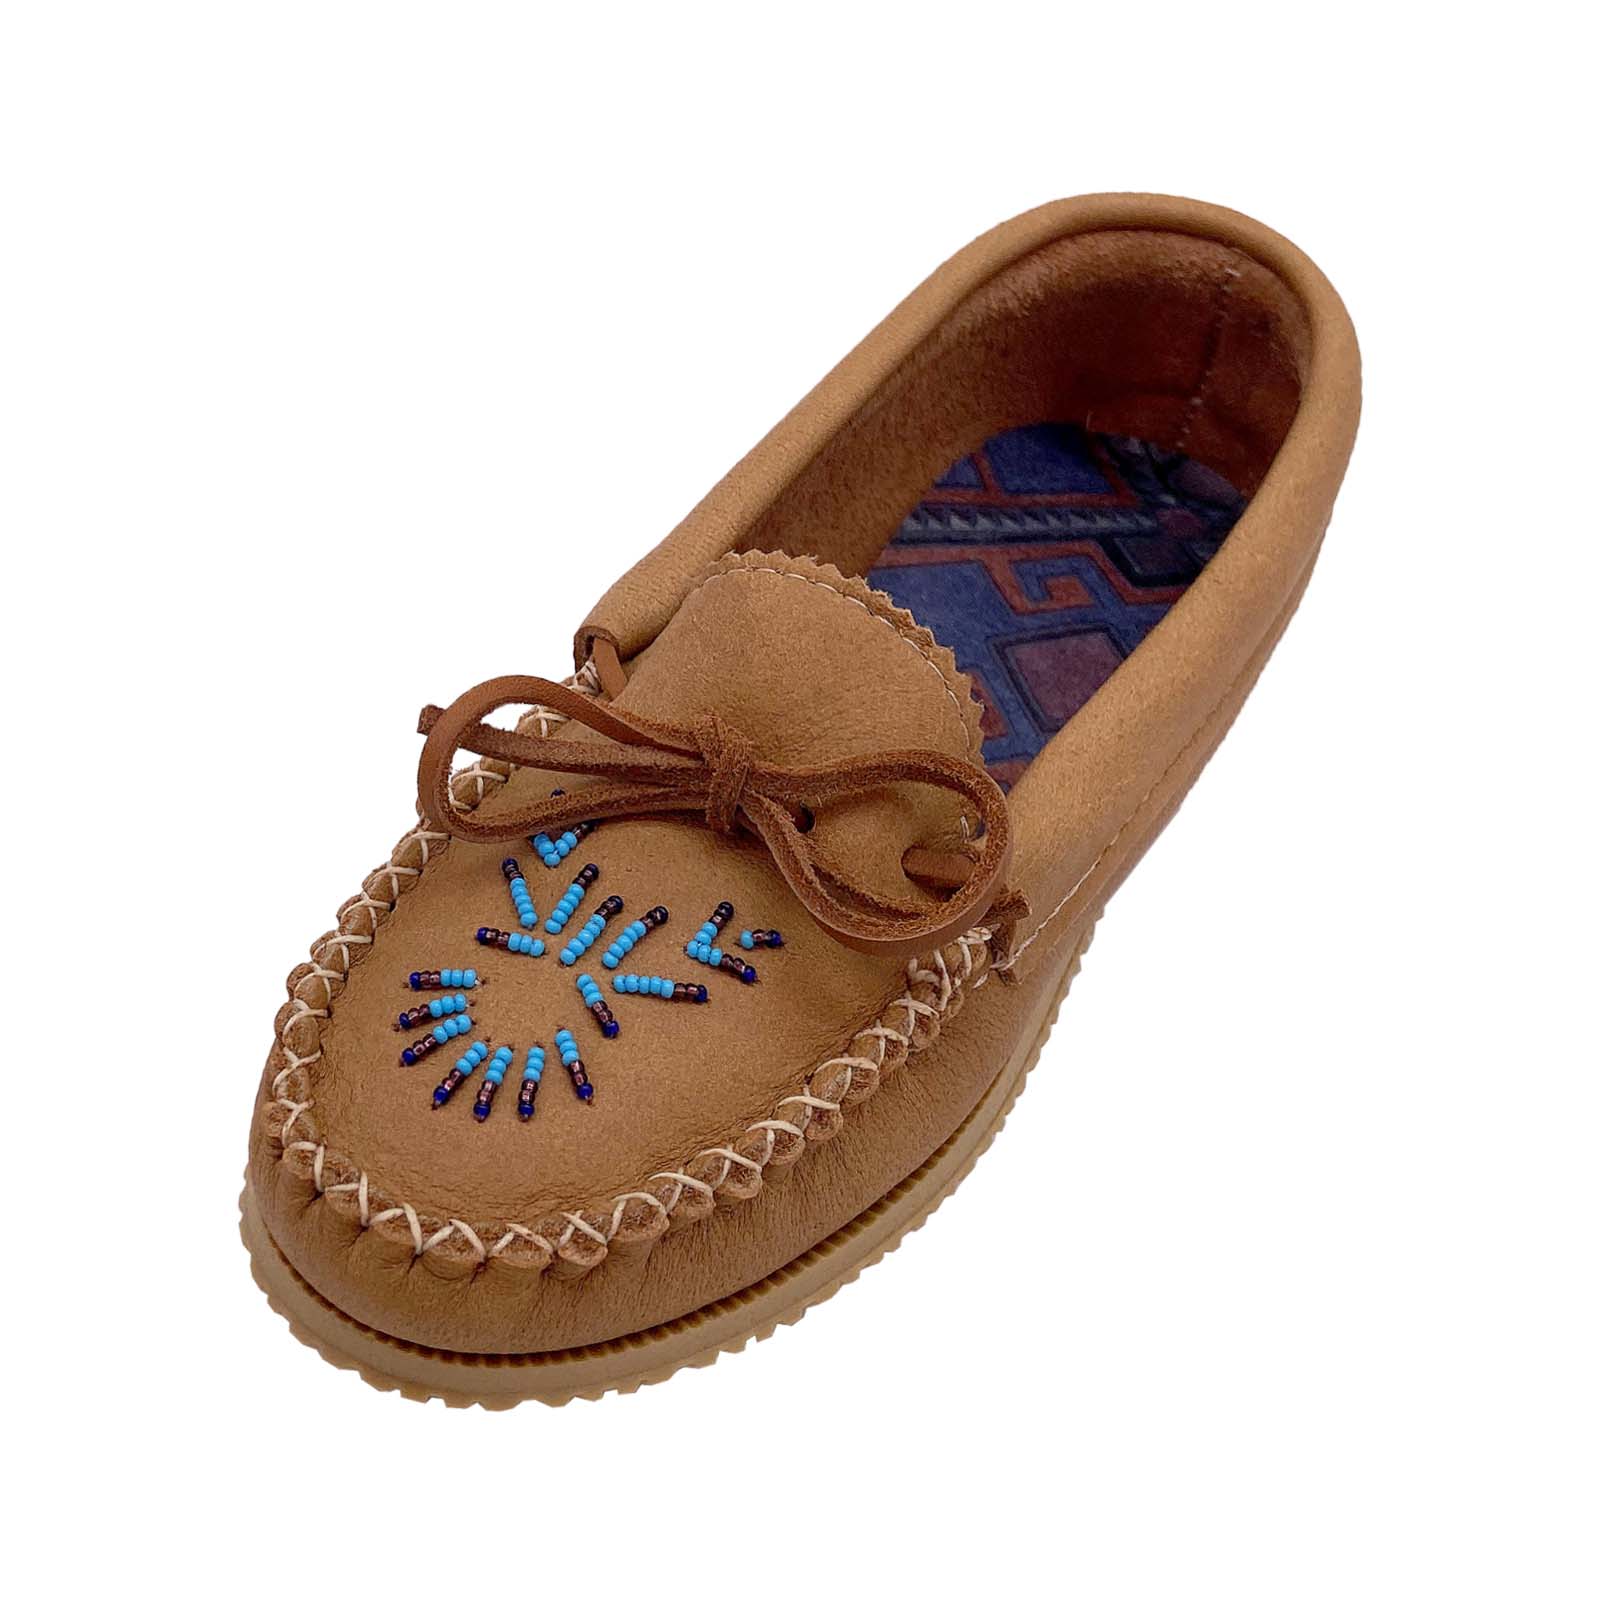 Women's Beaded Leather Moccasin Shoes